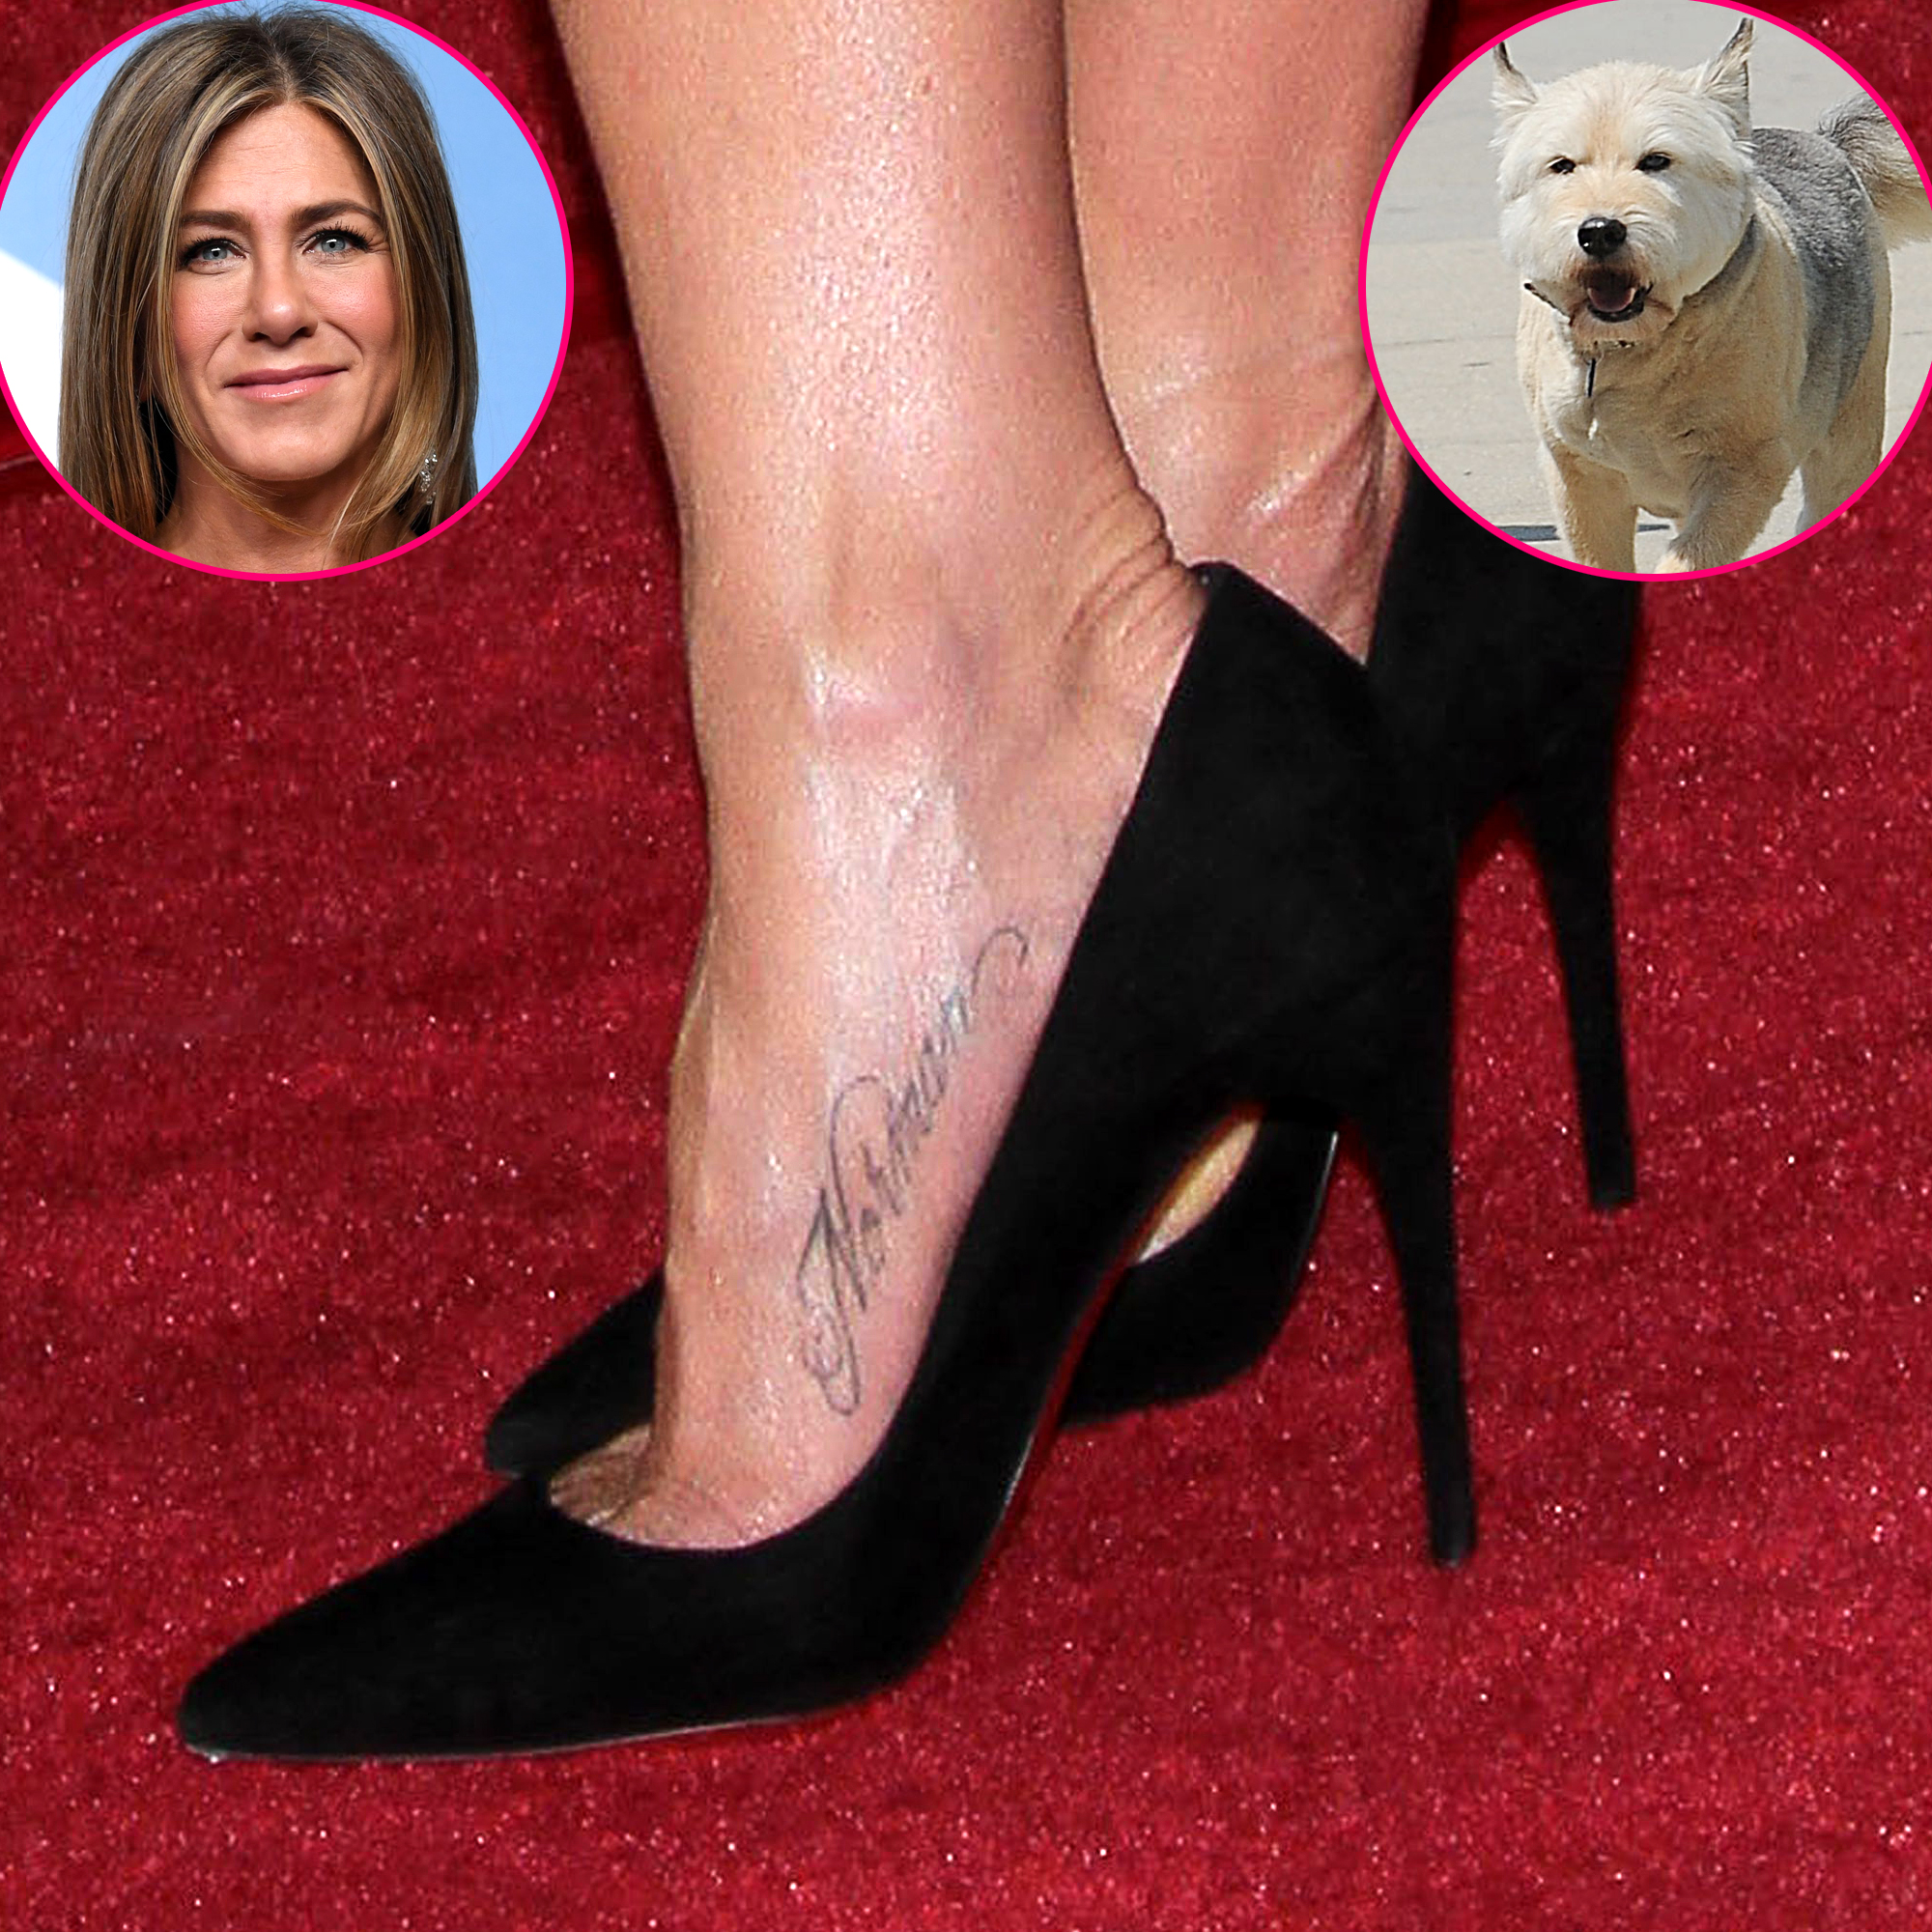 Is this the worst celebrity tattoo ever?